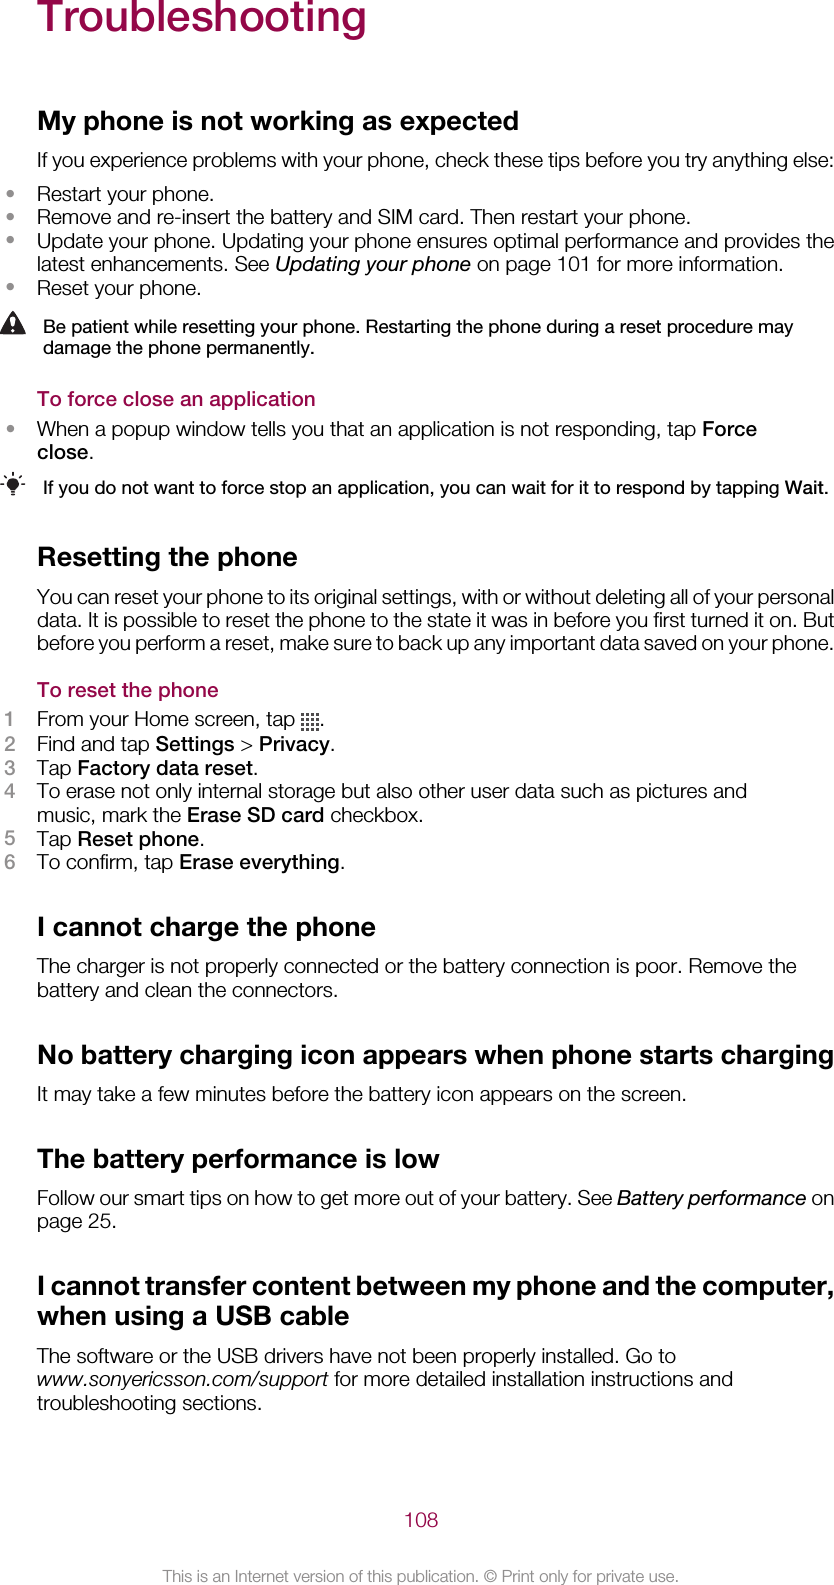 TroubleshootingMy phone is not working as expectedIf you experience problems with your phone, check these tips before you try anything else:•Restart your phone.•Remove and re-insert the battery and SIM card. Then restart your phone.•Update your phone. Updating your phone ensures optimal performance and provides thelatest enhancements. See Updating your phone on page 101 for more information.•Reset your phone.Be patient while resetting your phone. Restarting the phone during a reset procedure maydamage the phone permanently.To force close an application•When a popup window tells you that an application is not responding, tap Forceclose.If you do not want to force stop an application, you can wait for it to respond by tapping Wait.Resetting the phoneYou can reset your phone to its original settings, with or without deleting all of your personaldata. It is possible to reset the phone to the state it was in before you first turned it on. Butbefore you perform a reset, make sure to back up any important data saved on your phone.To reset the phone1From your Home screen, tap  .2Find and tap Settings &gt; Privacy.3Tap Factory data reset.4To erase not only internal storage but also other user data such as pictures andmusic, mark the Erase SD card checkbox.5Tap Reset phone.6To confirm, tap Erase everything.I cannot charge the phoneThe charger is not properly connected or the battery connection is poor. Remove thebattery and clean the connectors.No battery charging icon appears when phone starts chargingIt may take a few minutes before the battery icon appears on the screen.The battery performance is lowFollow our smart tips on how to get more out of your battery. See Battery performance onpage 25.I cannot transfer content between my phone and the computer,when using a USB cableThe software or the USB drivers have not been properly installed. Go towww.sonyericsson.com/support for more detailed installation instructions andtroubleshooting sections.108This is an Internet version of this publication. © Print only for private use.